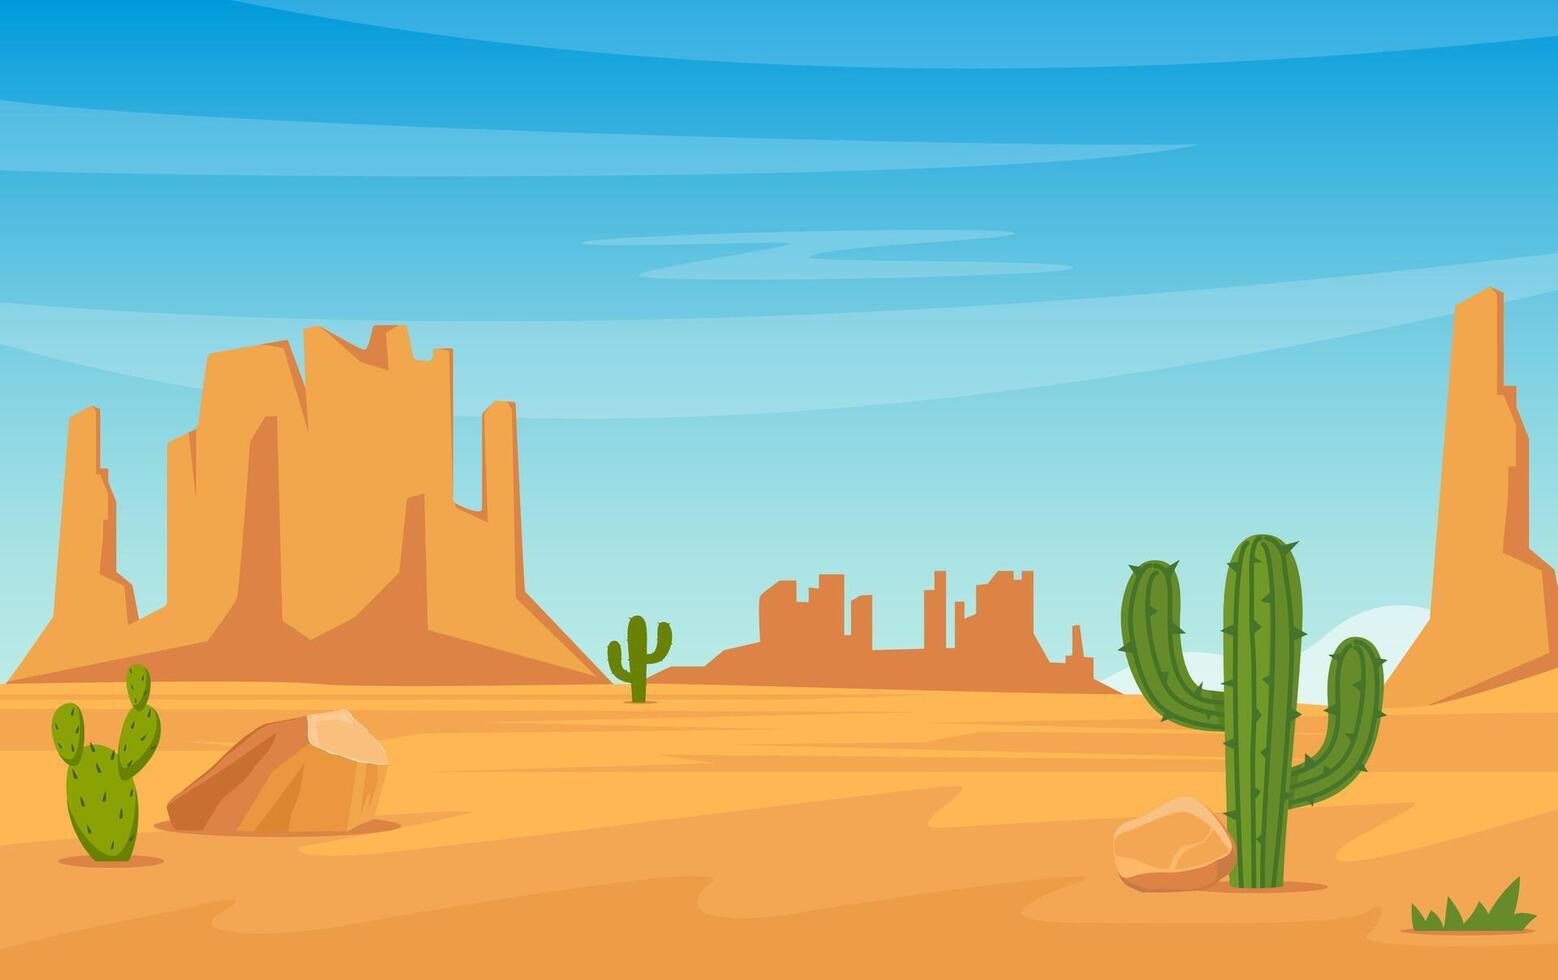 Texas desert landscape with cactuses, hills, plants and mountains. Western scene. Wild West Texas. Mexican desert. vector